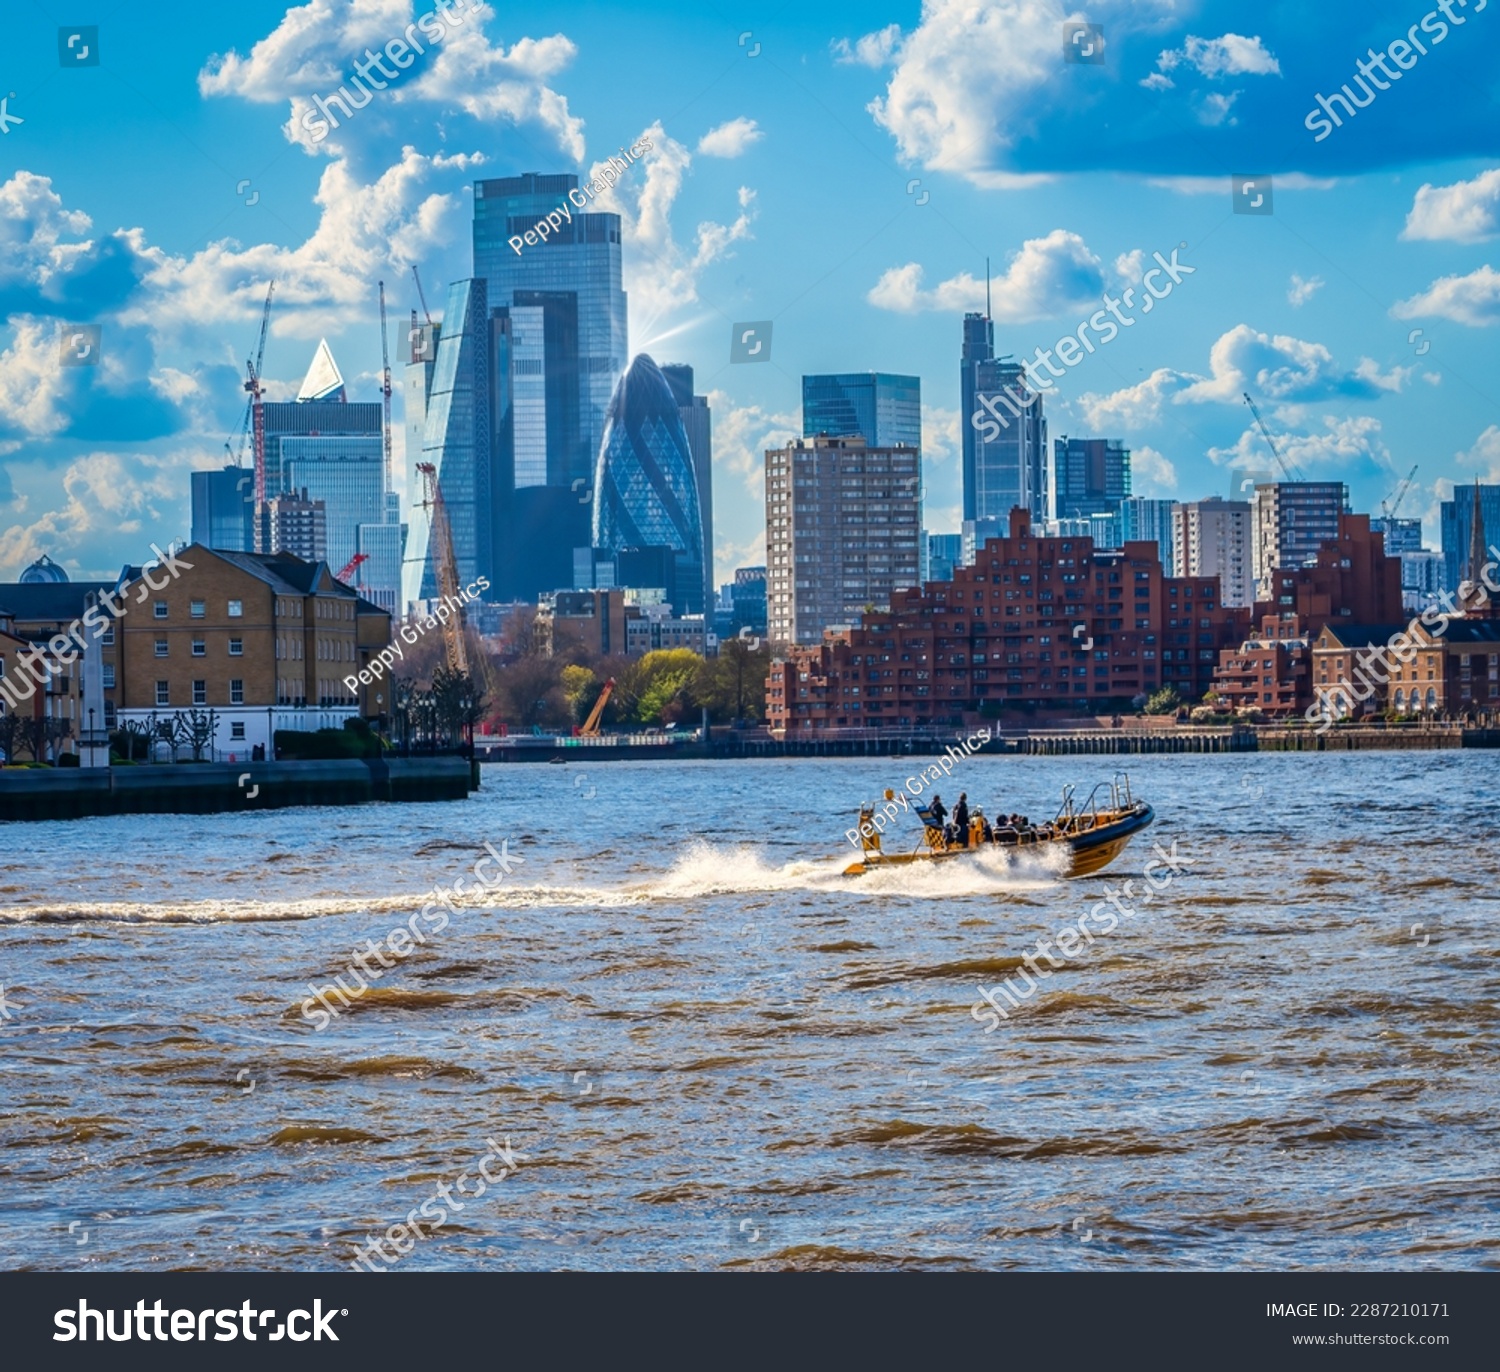 A speed boat on the Thames with central London buildings in the background  #2287210171